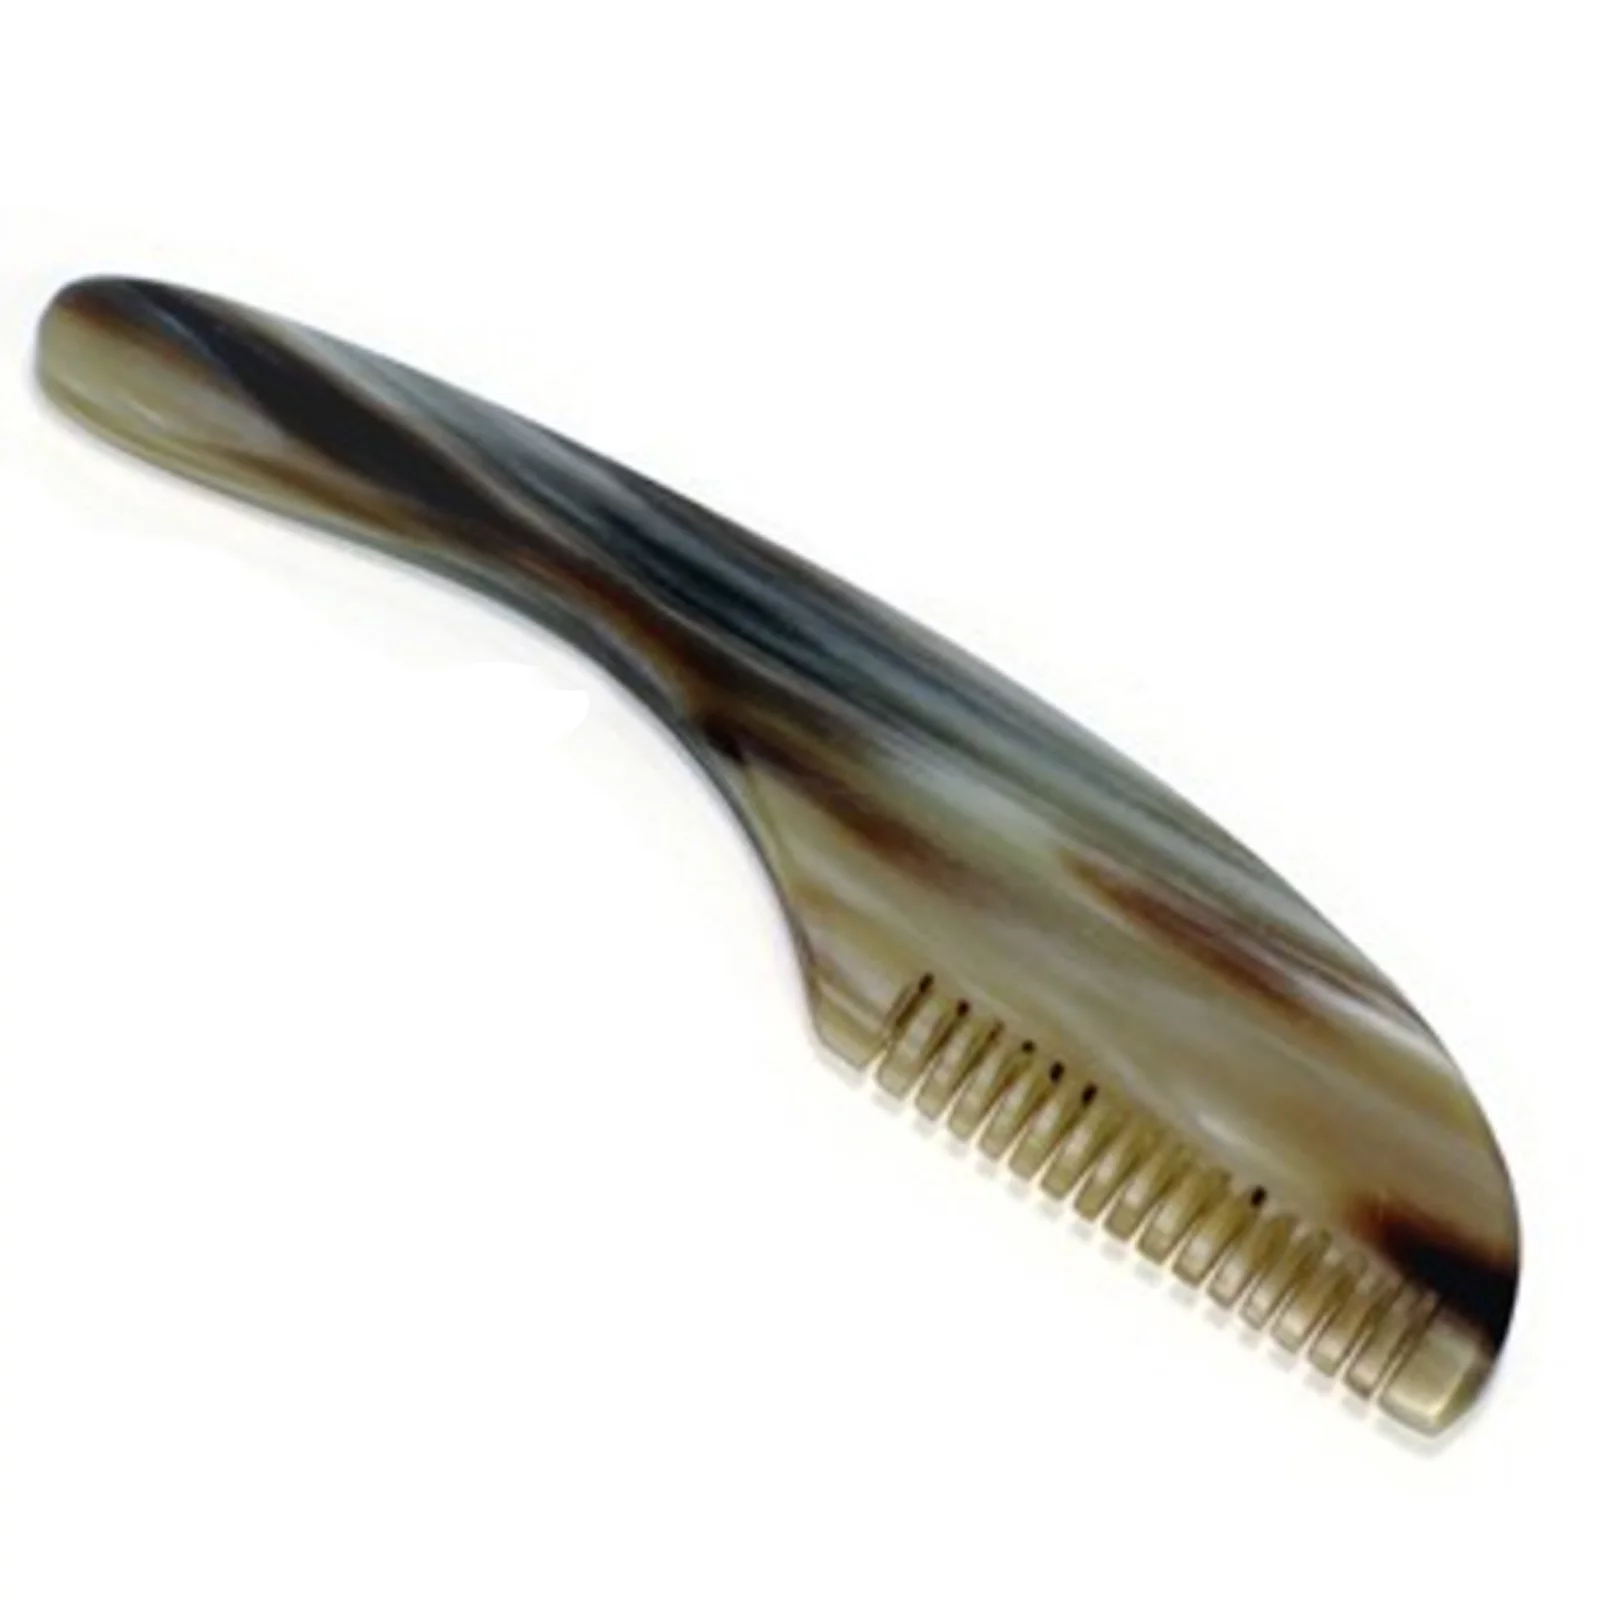 Polished Ox Horn Moustache Comb With Handle